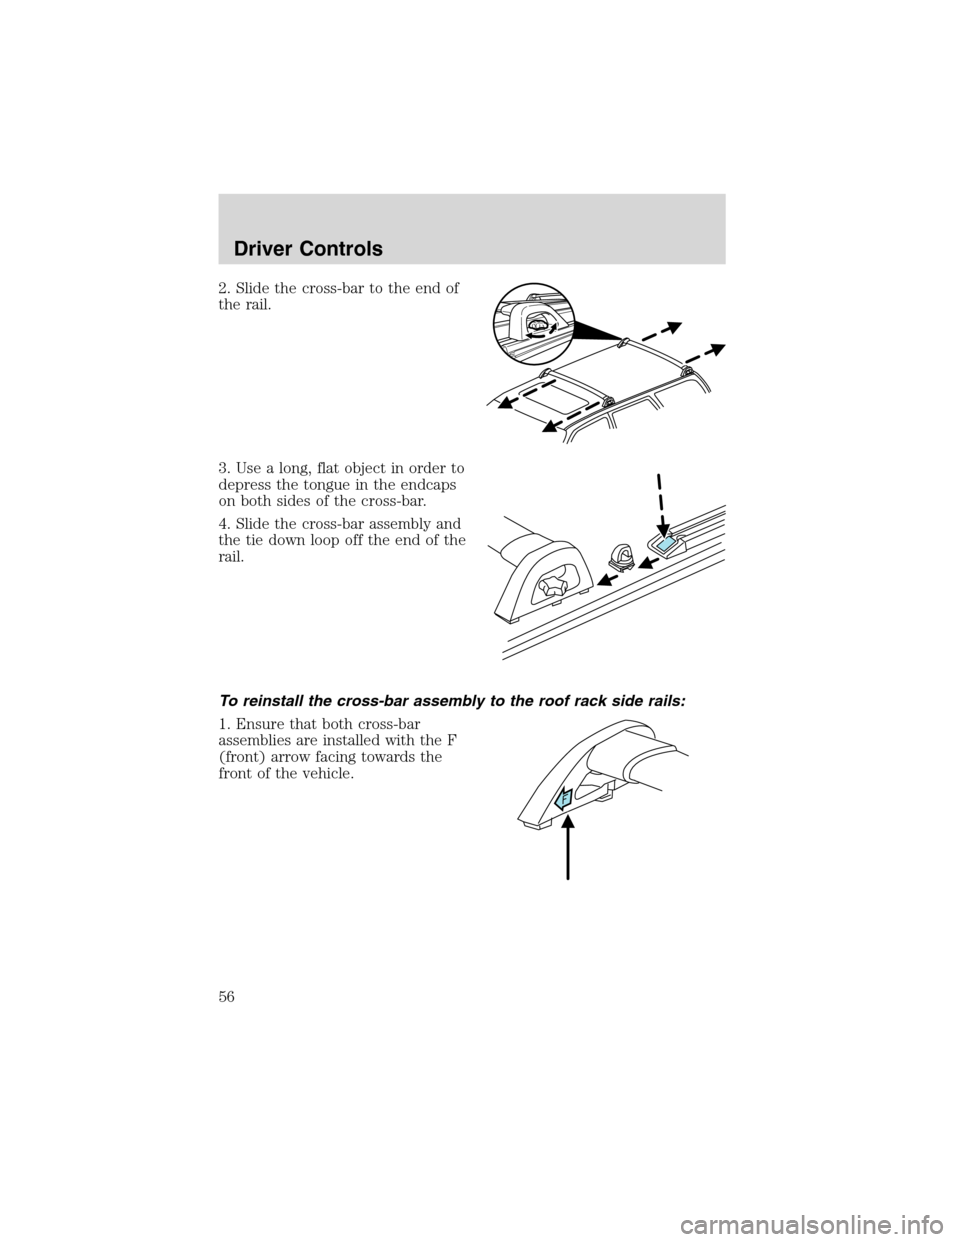 FORD ESCAPE 2003 1.G Owners Manual 2. Slide the cross-bar to the end of
the rail.
3. Use a long, flat object in order to
depress the tongue in the endcaps
on both sides of the cross-bar.
4. Slide the cross-bar assembly and
the tie down